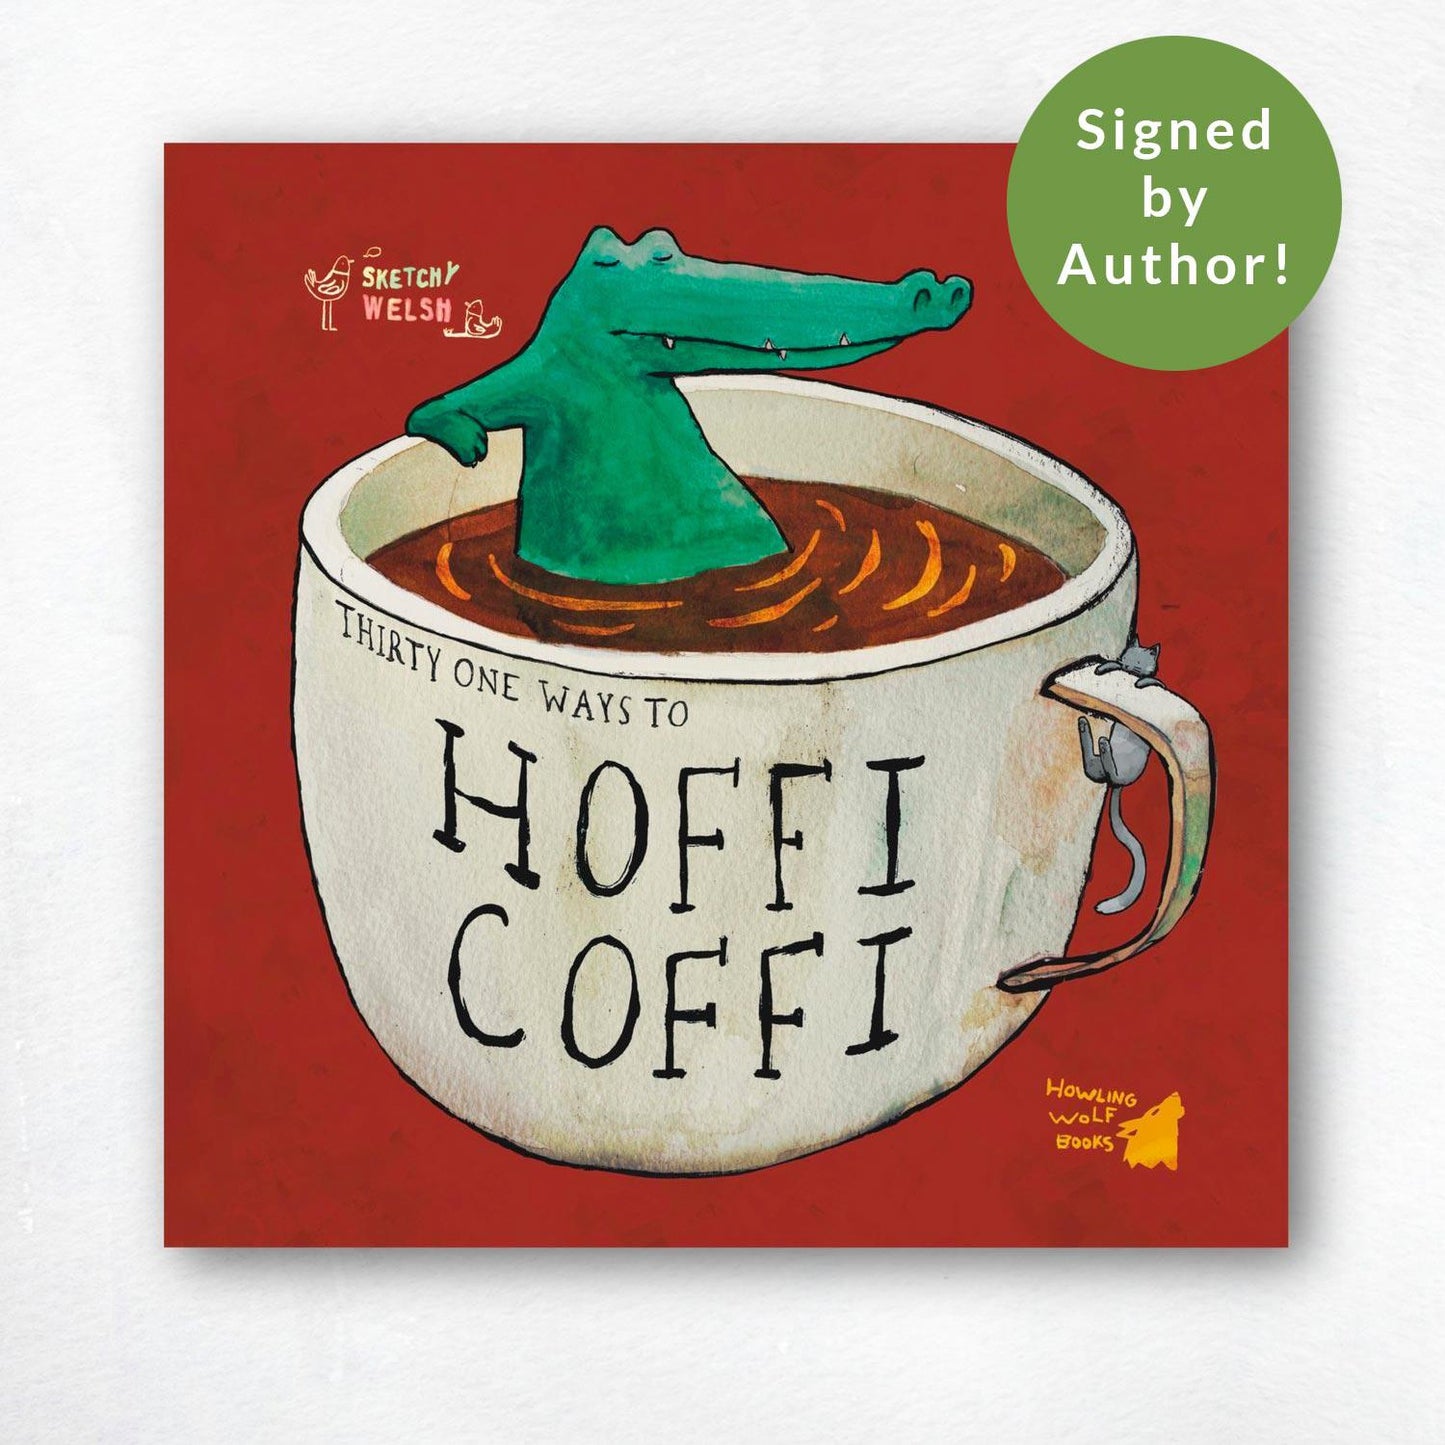 31 Ways to HOFFI COFFI: Learning Welsh with 31 strange coffee habits - SIGNED!